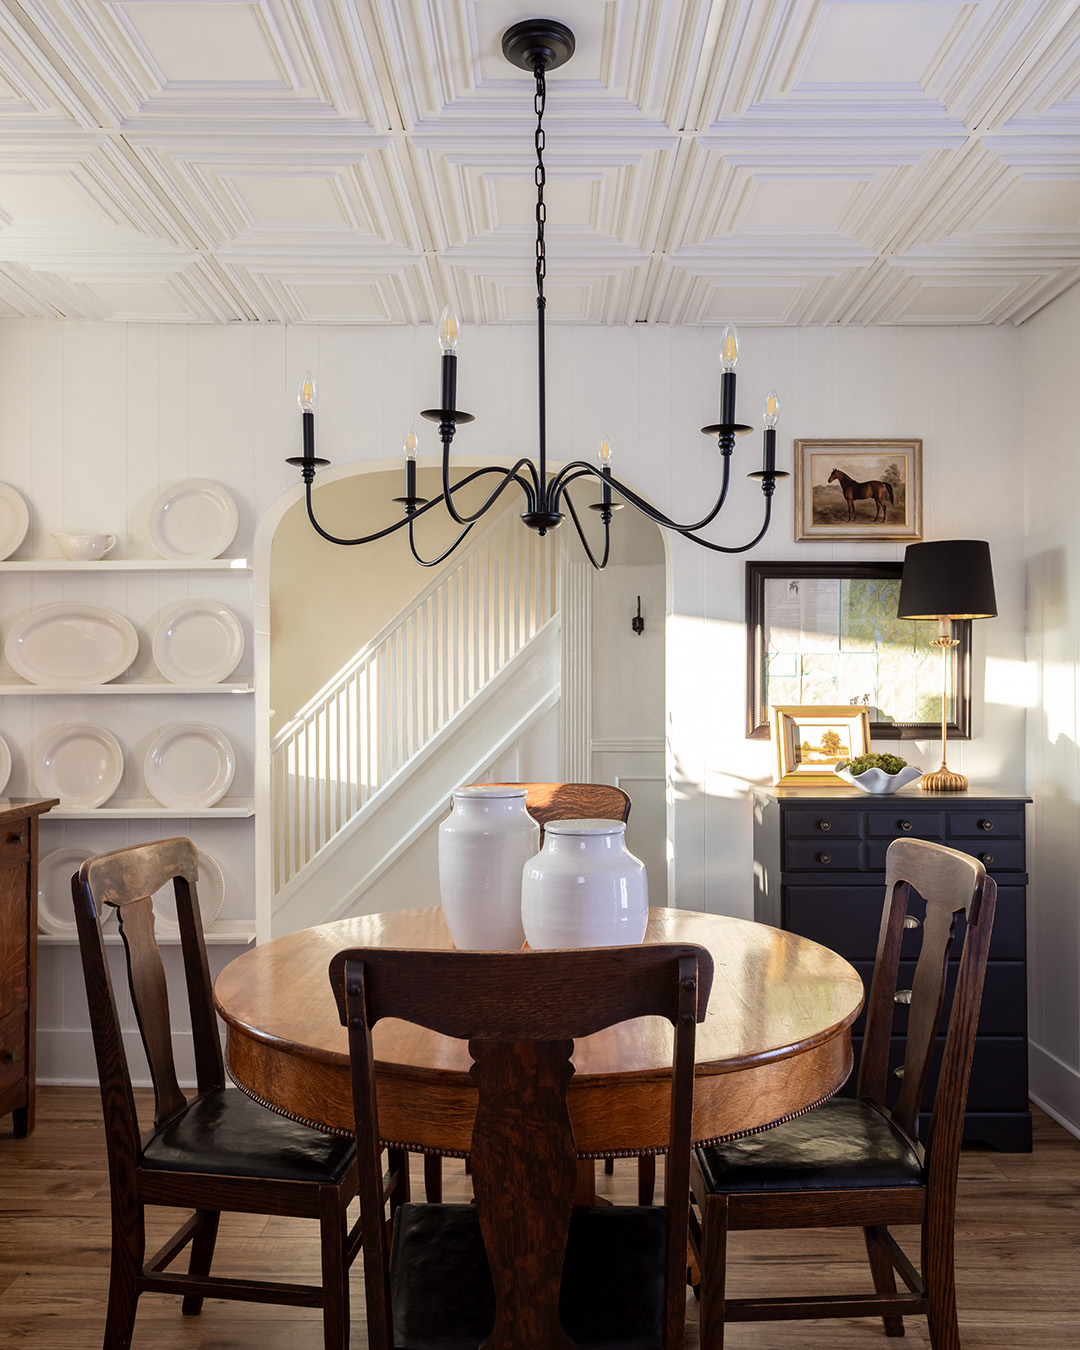 Traditional farmhouse dining room with black ceiling light fixture and plate wall.